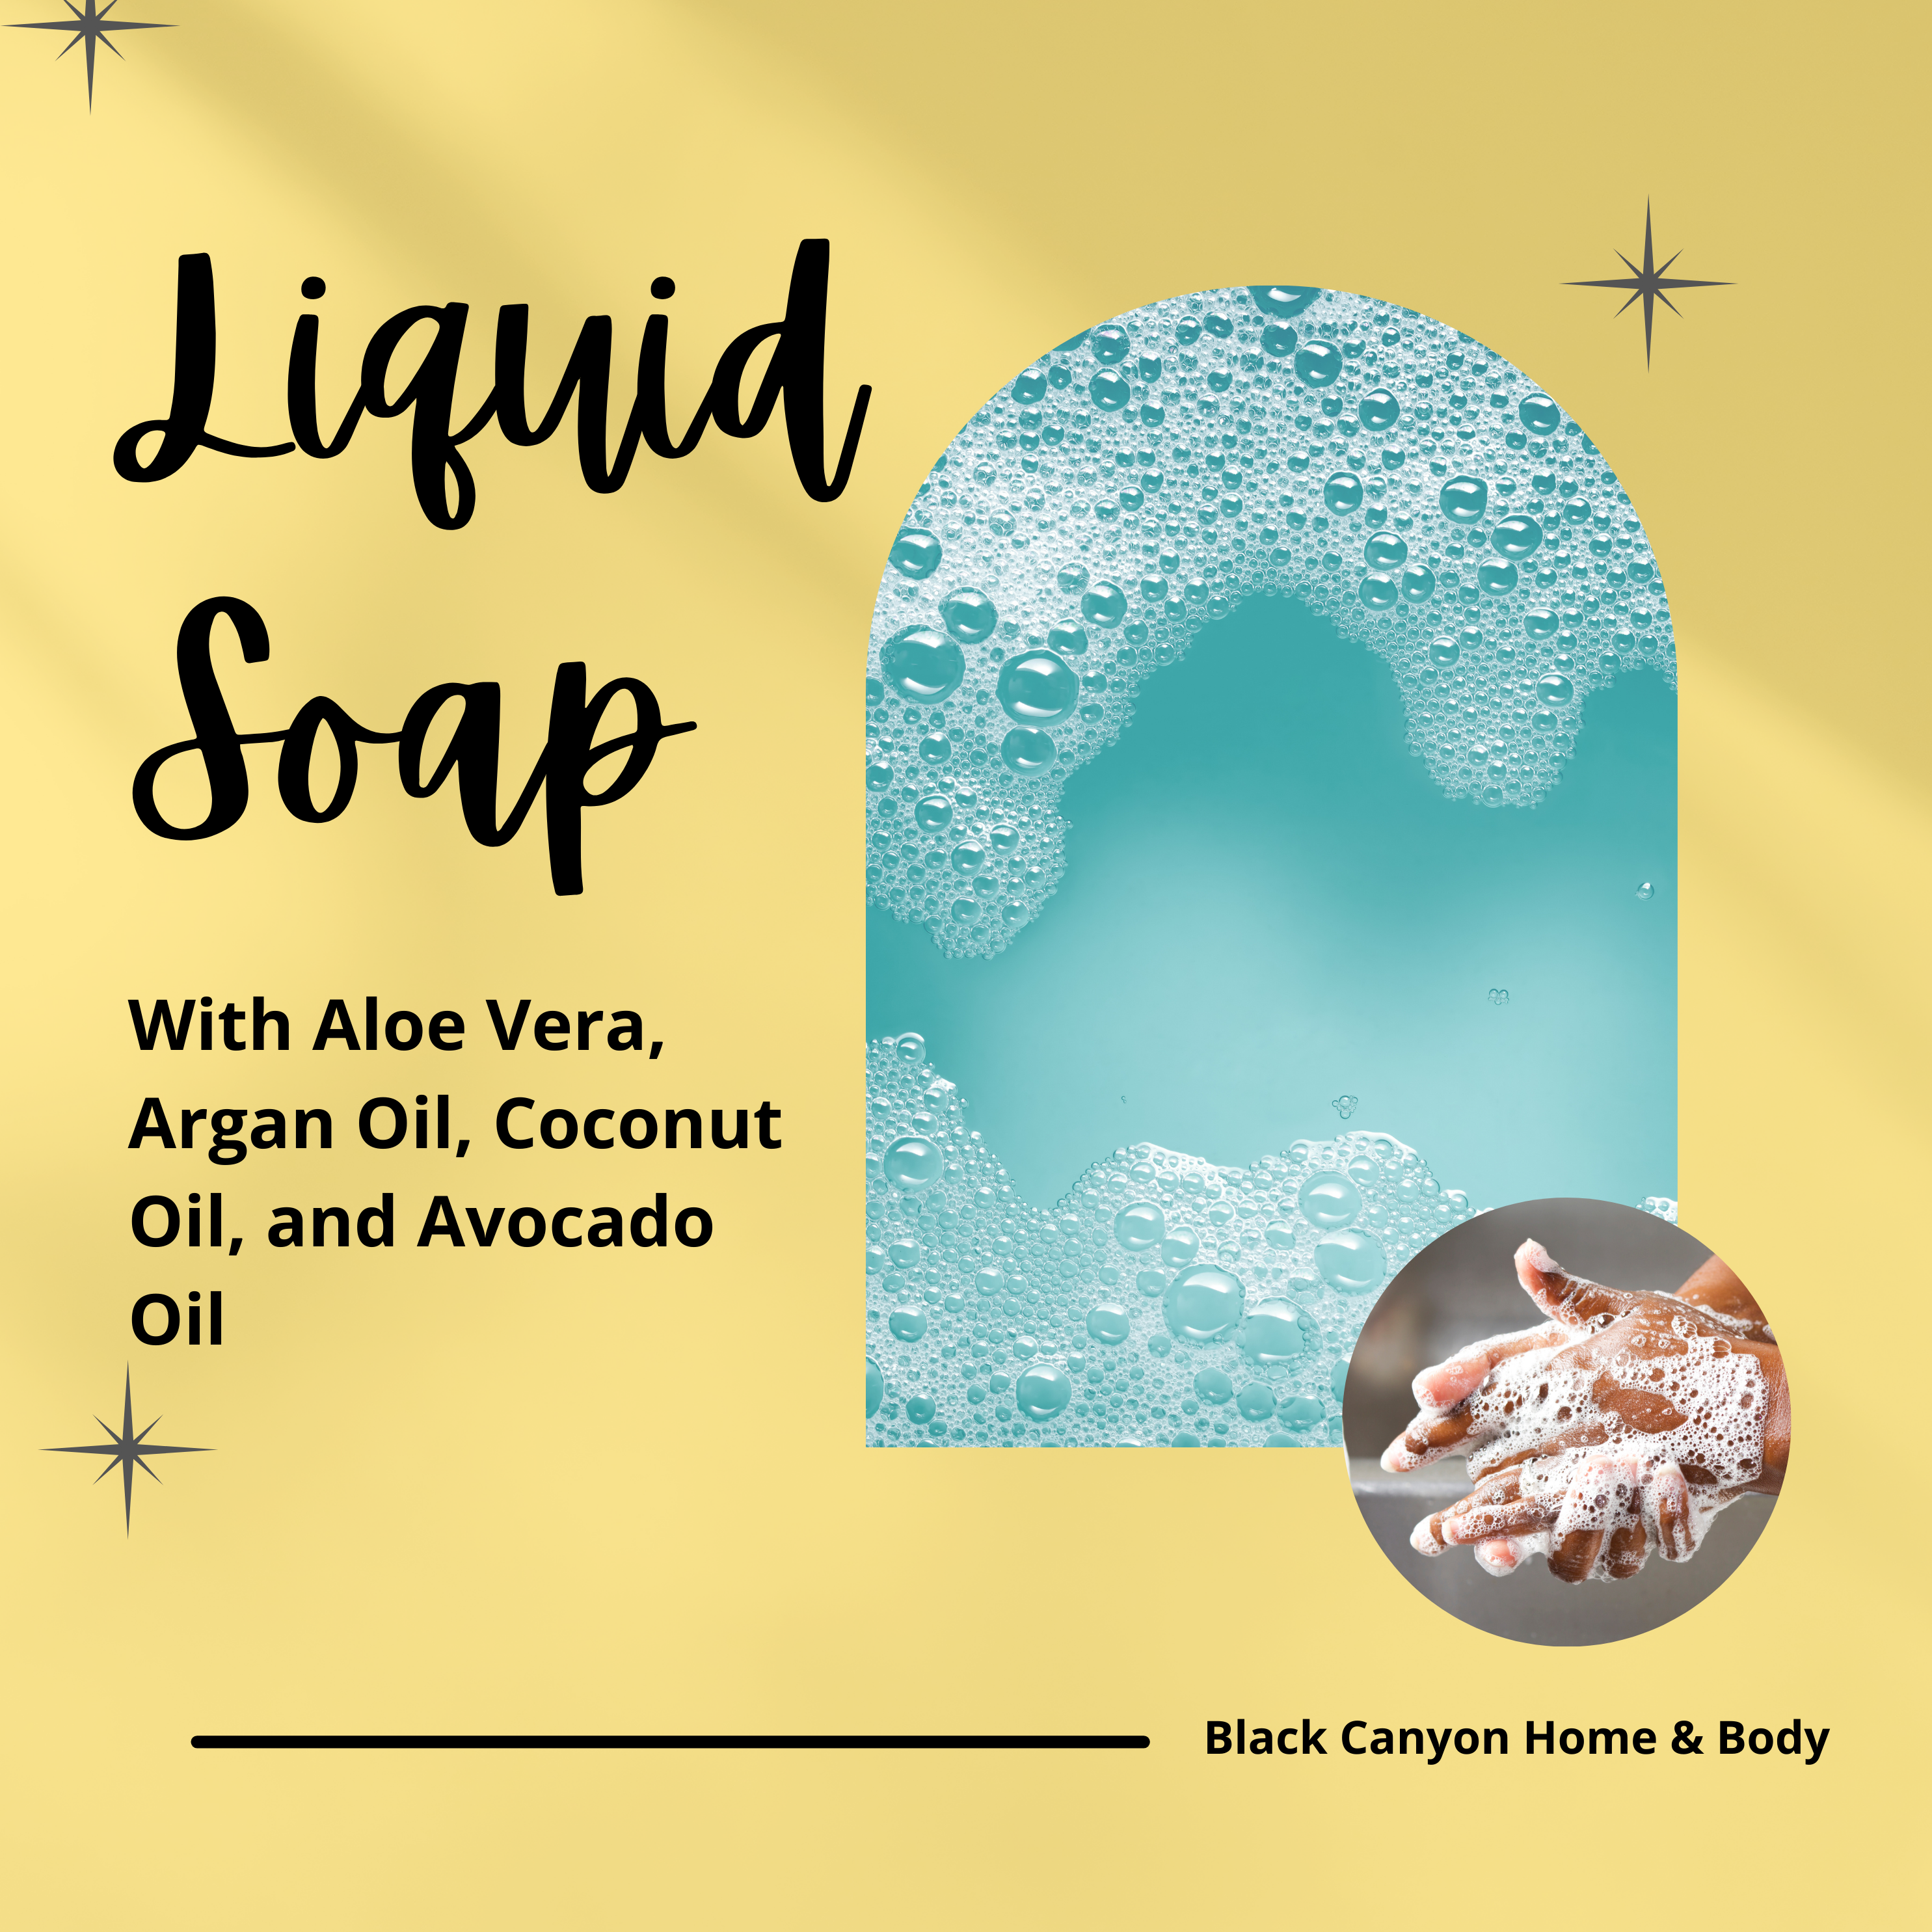 Black Canyon Cotton Candy Scented Liquid Hand Soap